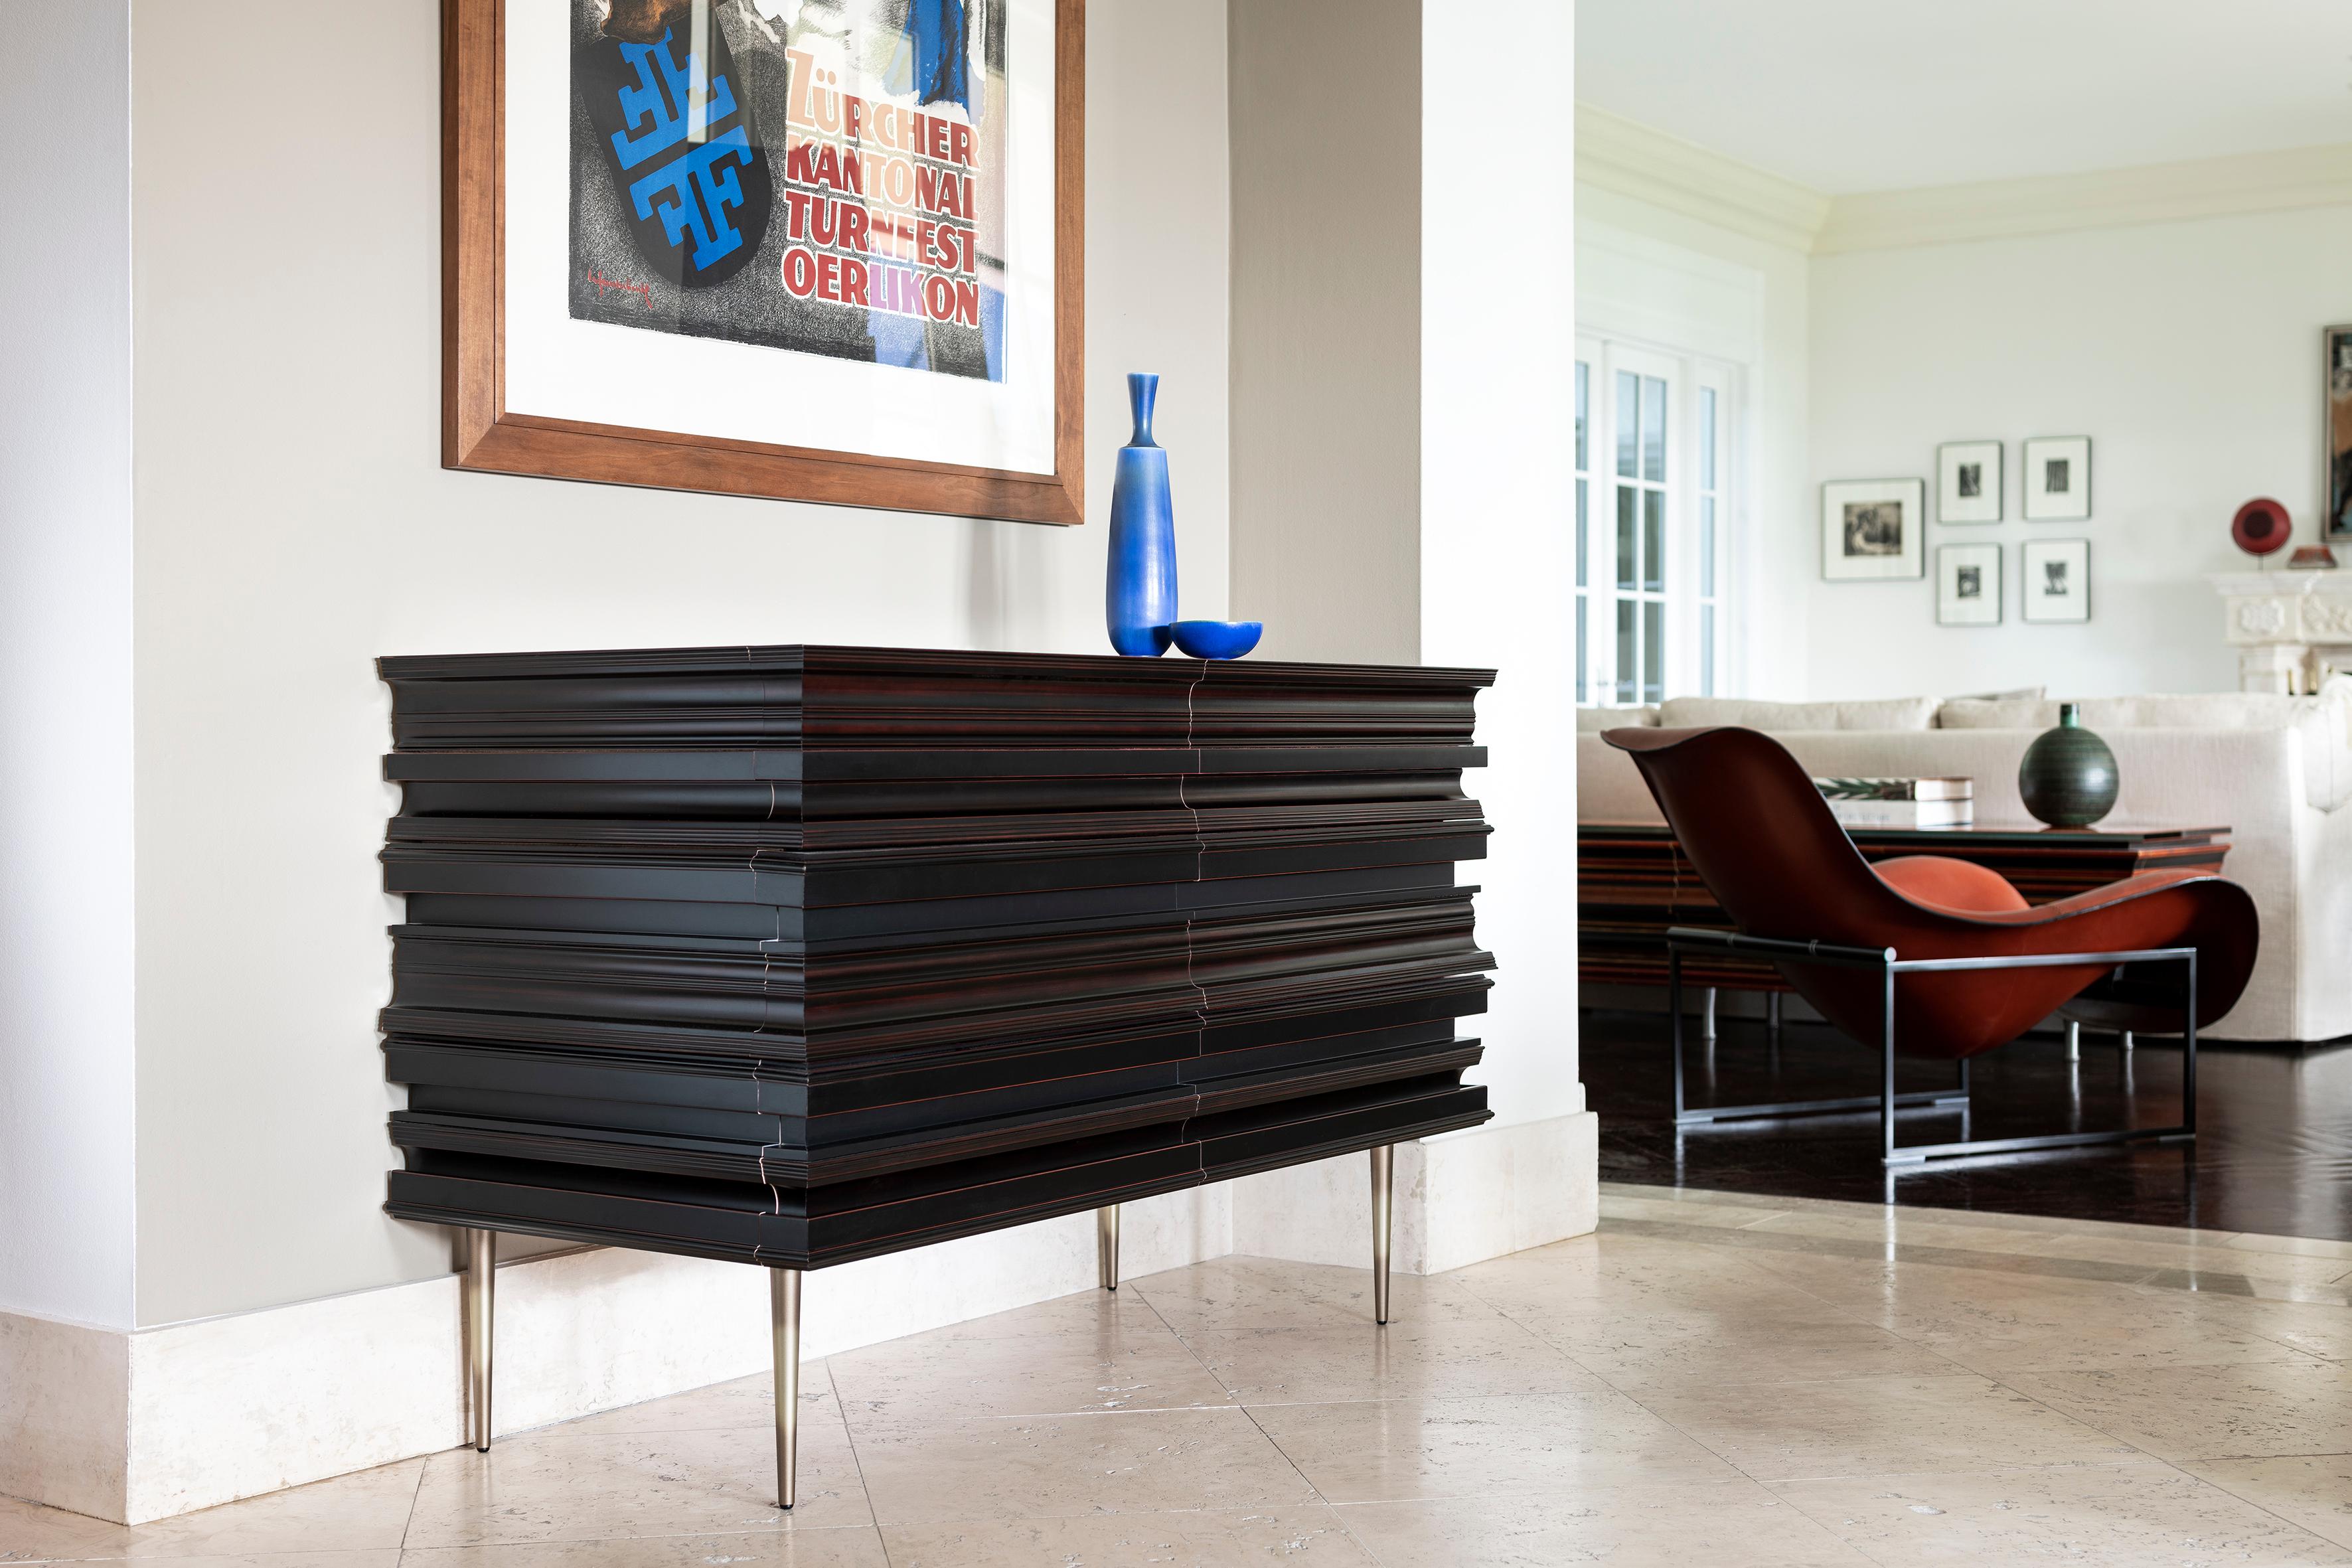 Finest crafted darkened wood moldings and lacquer credenza. Moldings are applied to conceal drawers and acting as handles for the piece. The process to achieve the credenza ’s surface is the result of the combination of multiple moldings with